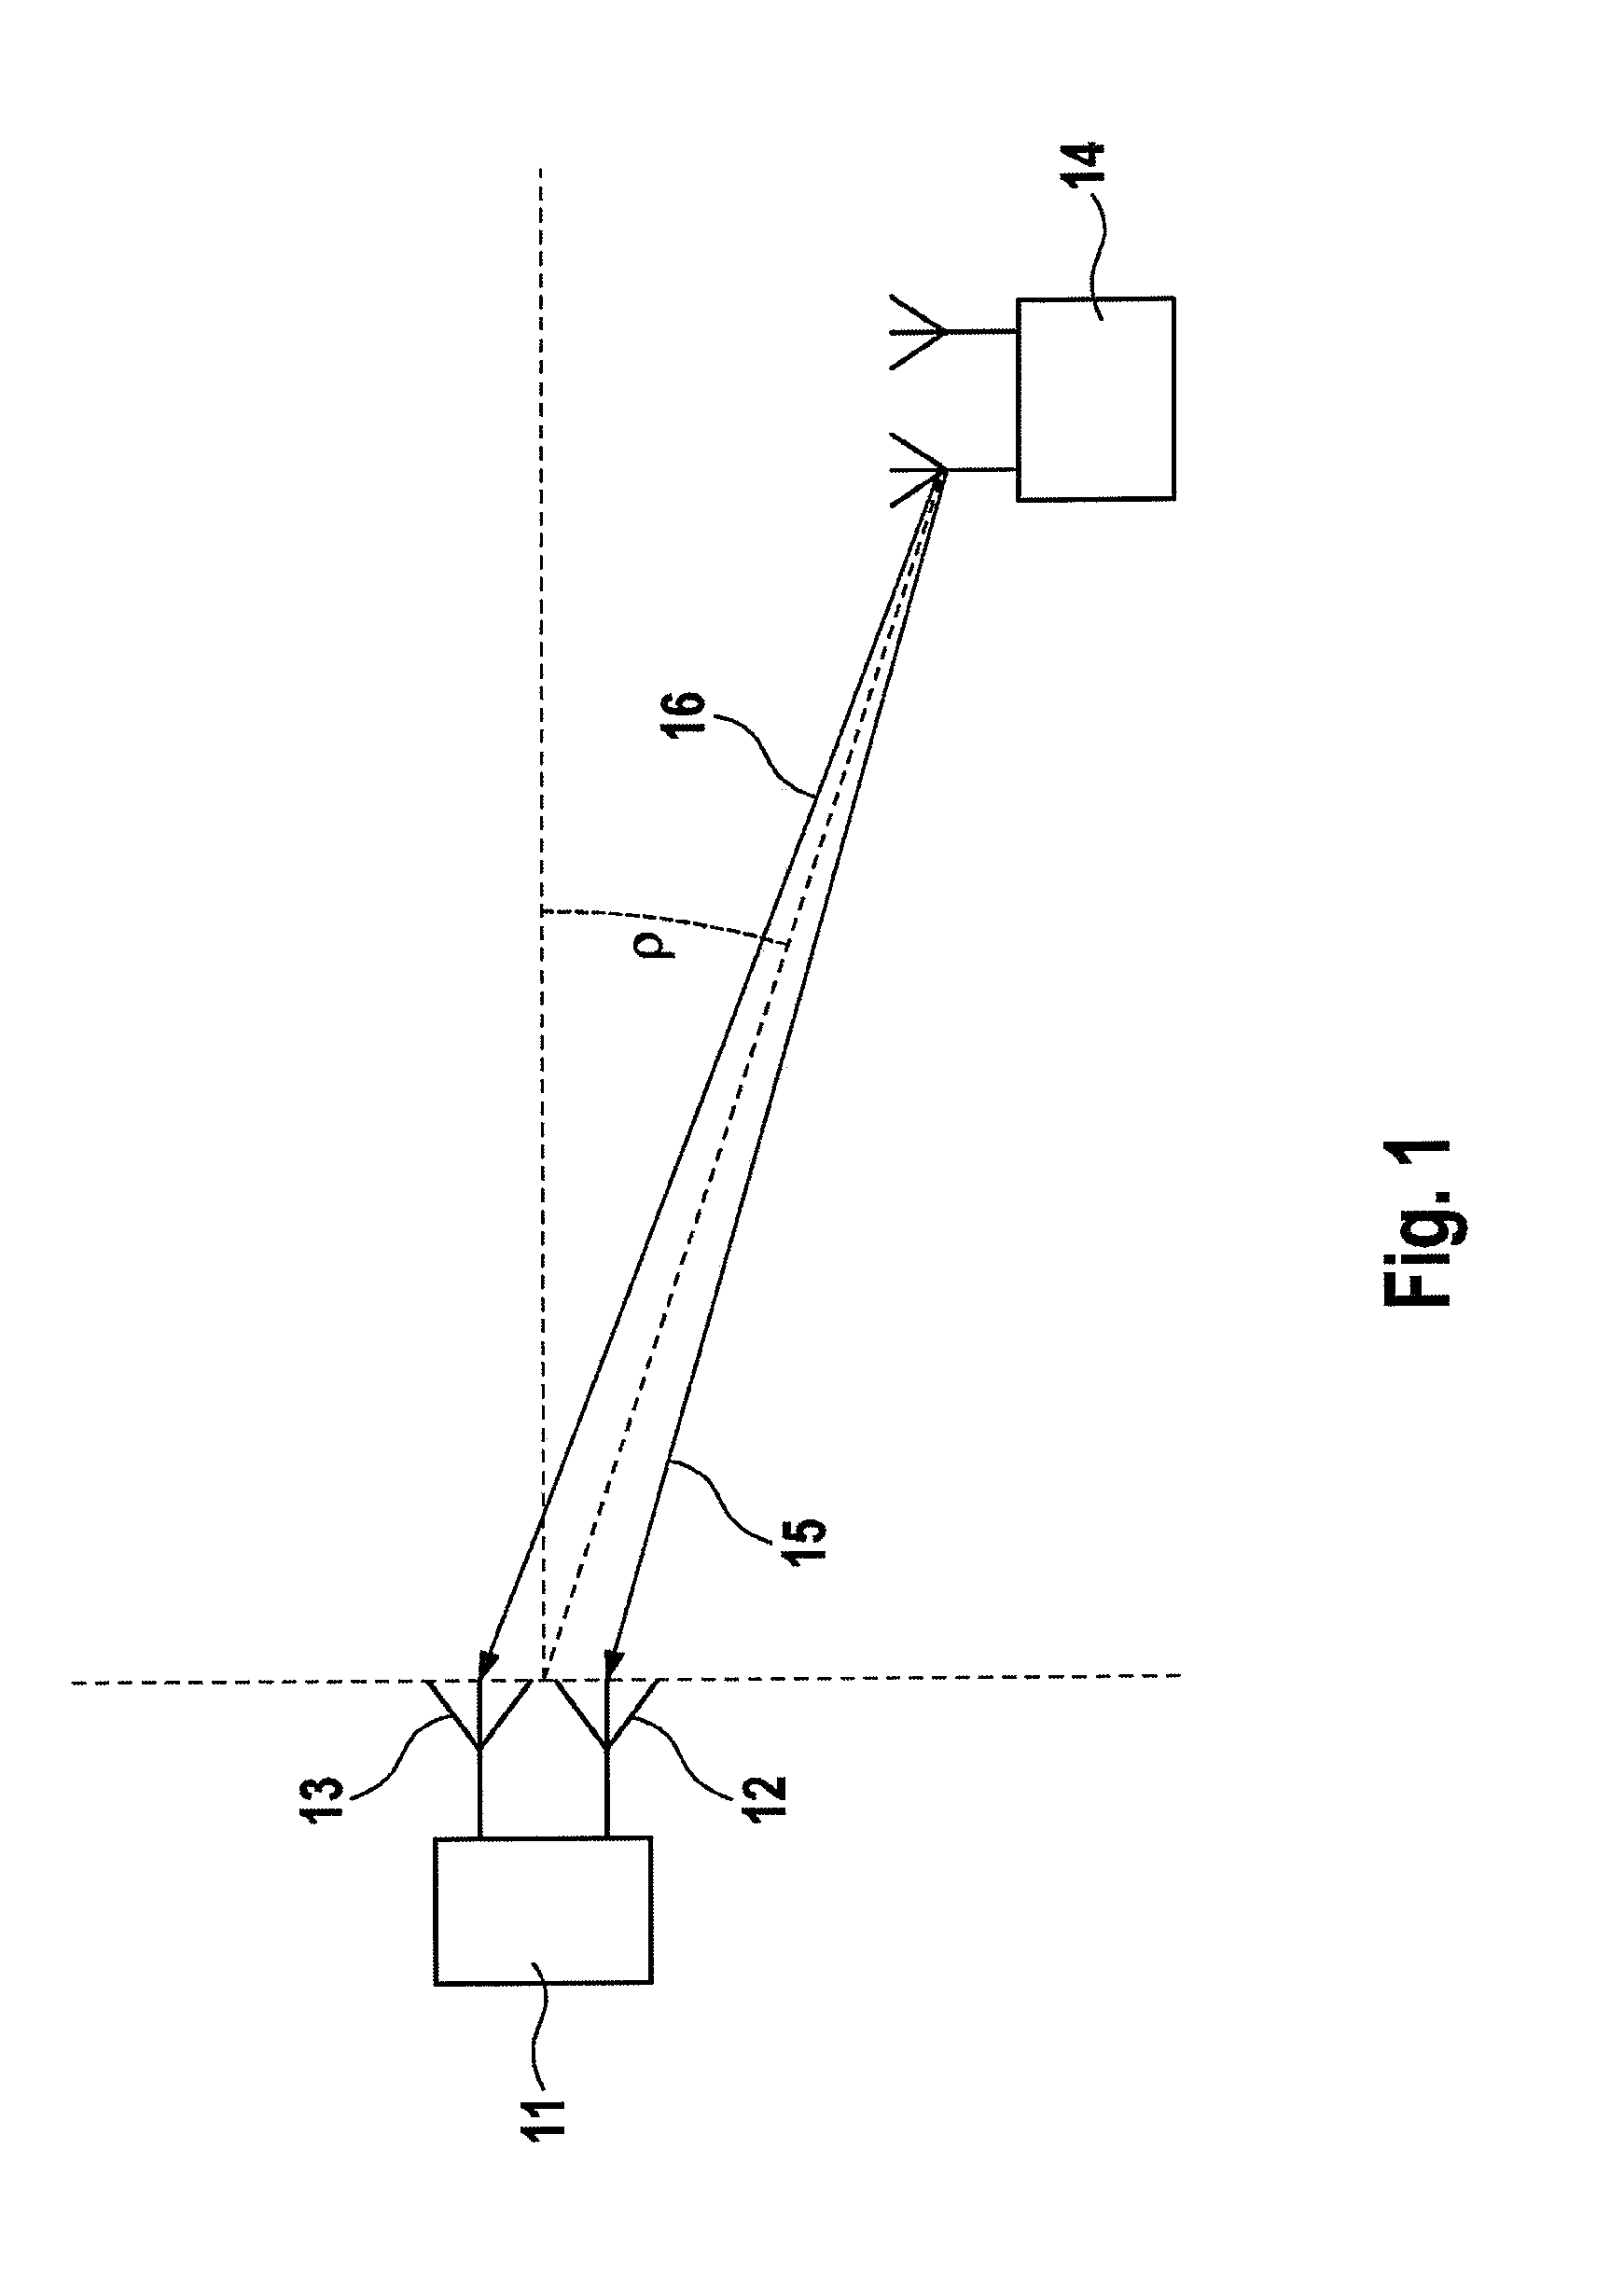 Method and communication apparatus for validating a data content in a wirelessly received communication signal, and use of the communication apparatus